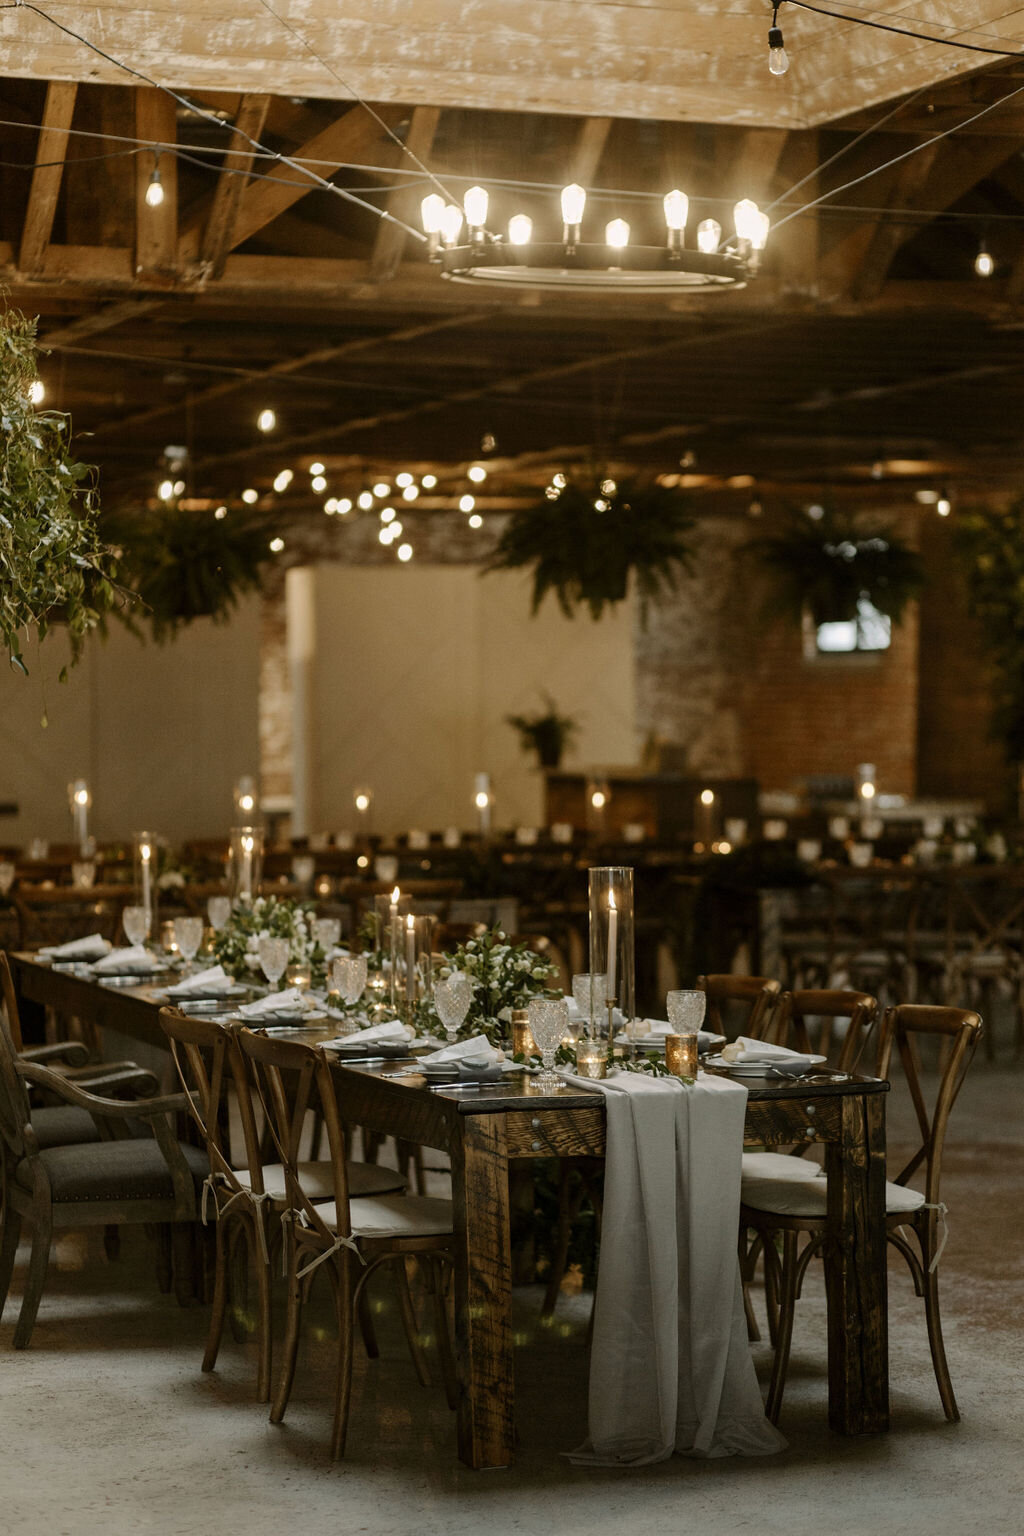 wedding reception table decor with gray napkins, candles and greenery